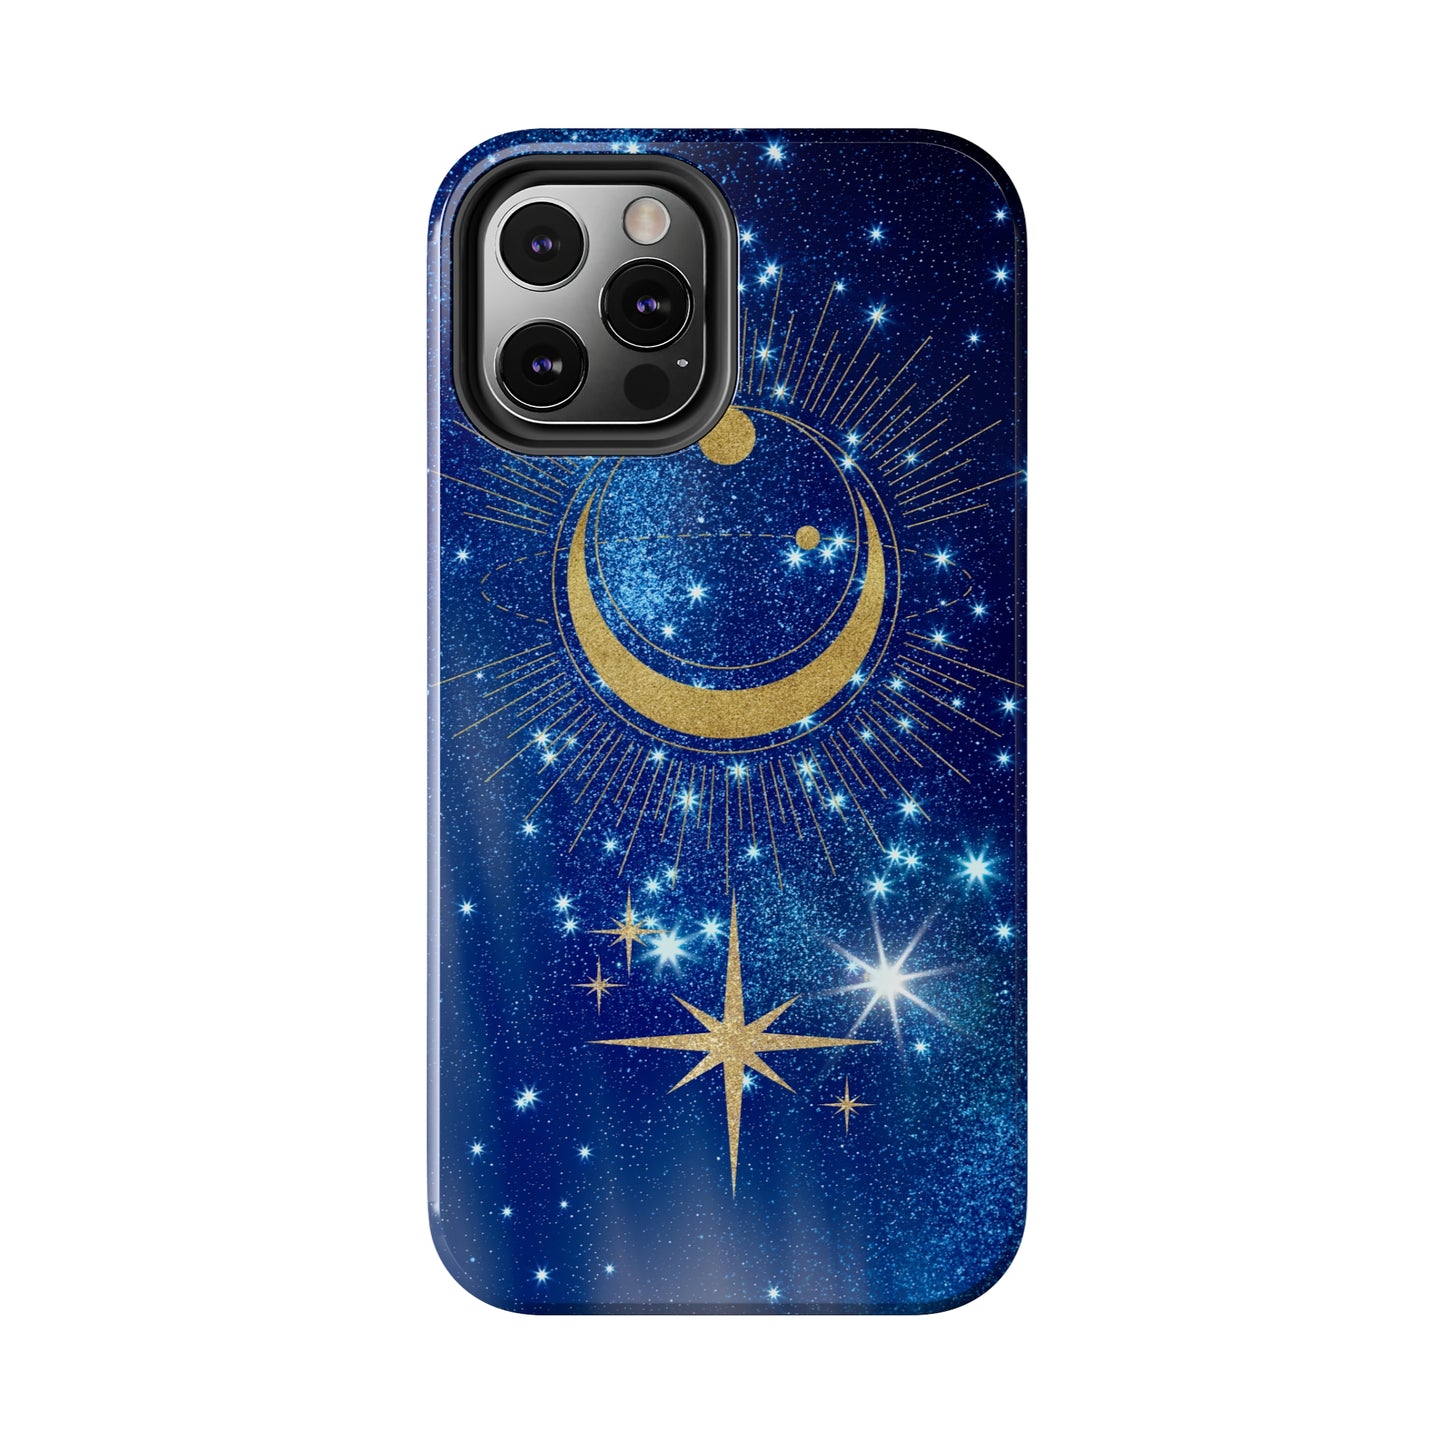 All iPhone Models: Celestial Night Tough Phone Cases Wireless Charging Compatible